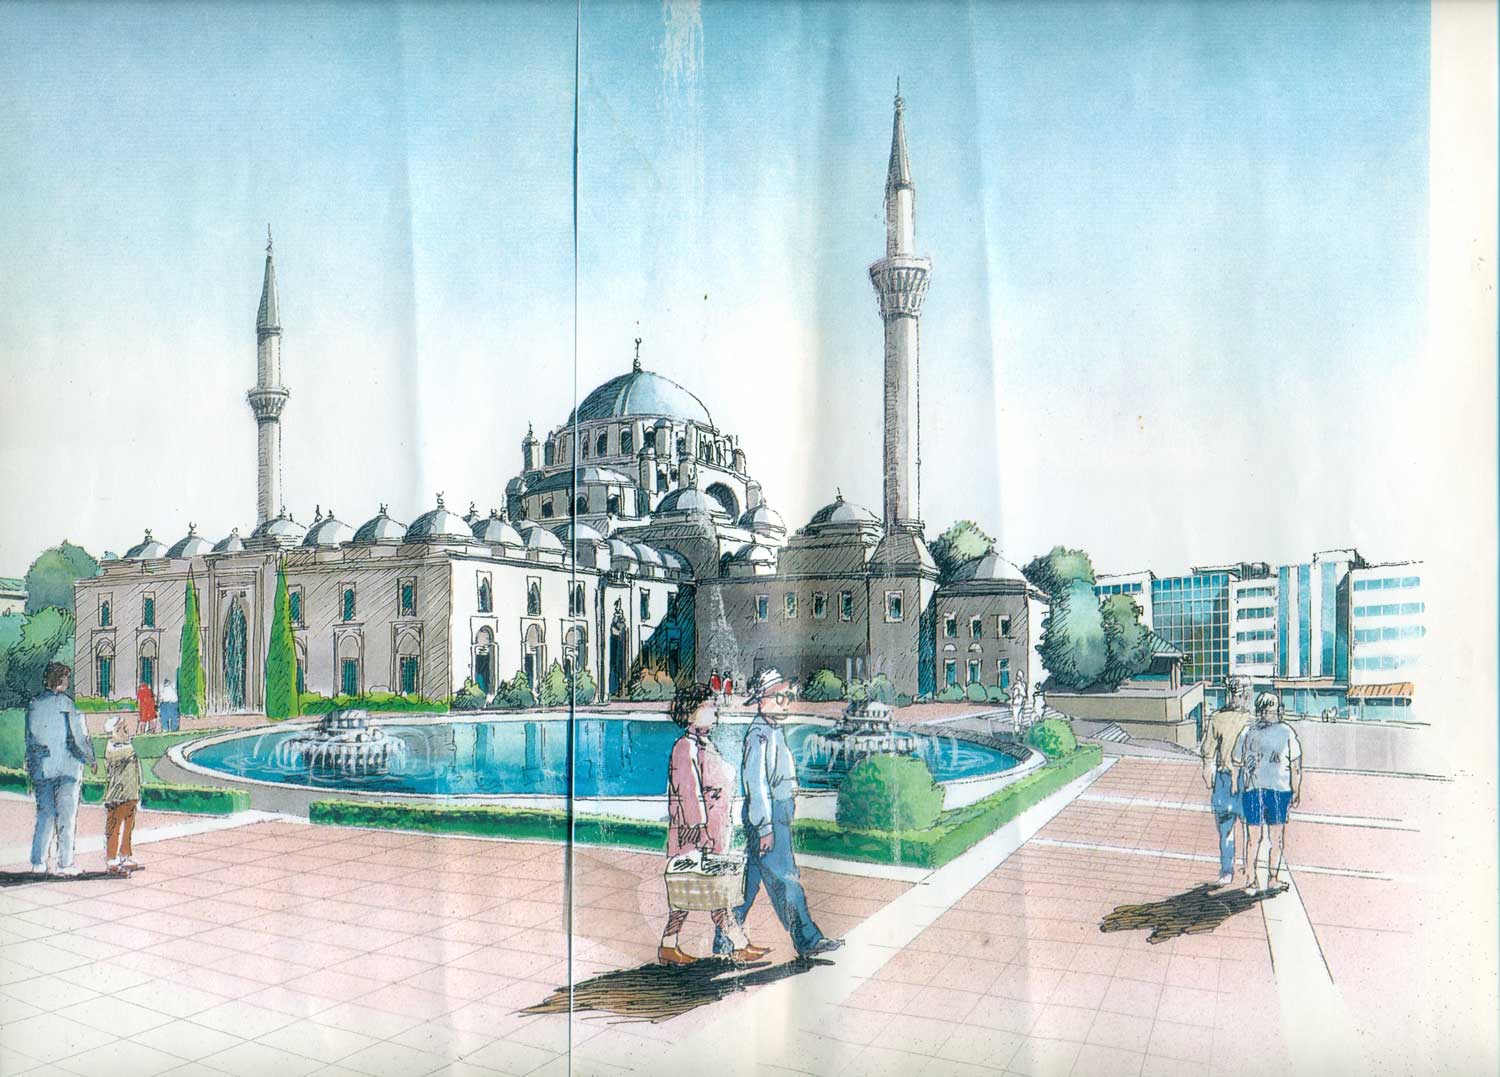 Colored architectural drawing produced for the 1987 Design Competition for the Redesign of Beyazıt Meydanı, featuring a public fountain outside Beyazıt Mosque.